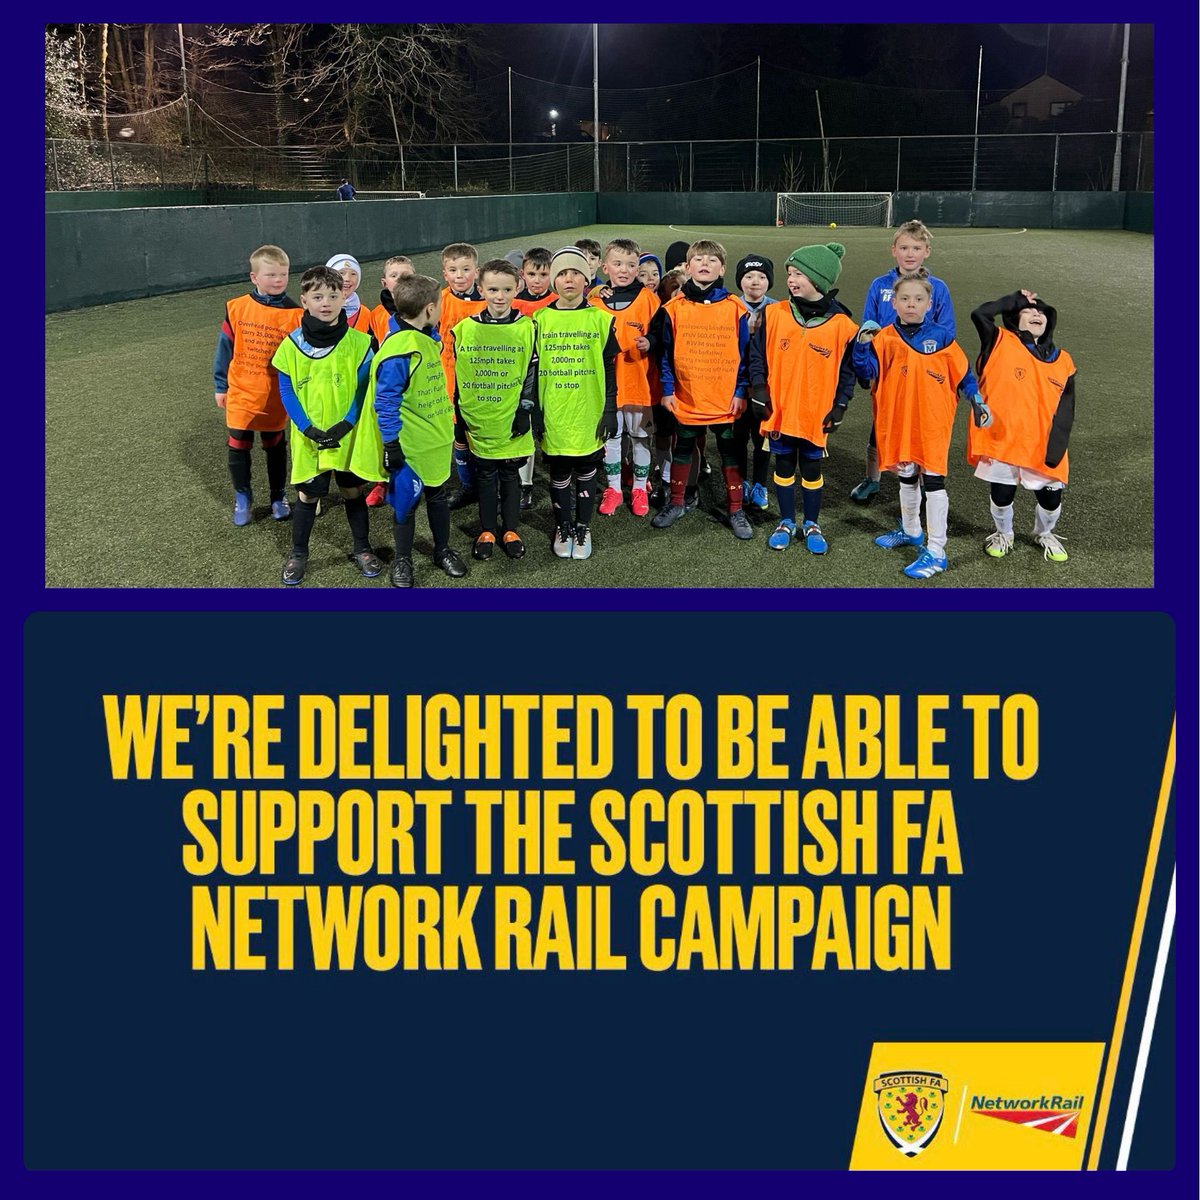 Milngavie FC 2016s have now finished the Network Rail Campaign. They did a recap. What a great campaign to be part of. #ScotFaCentral #scottishfa #NetworkRailScot #BTPScotland